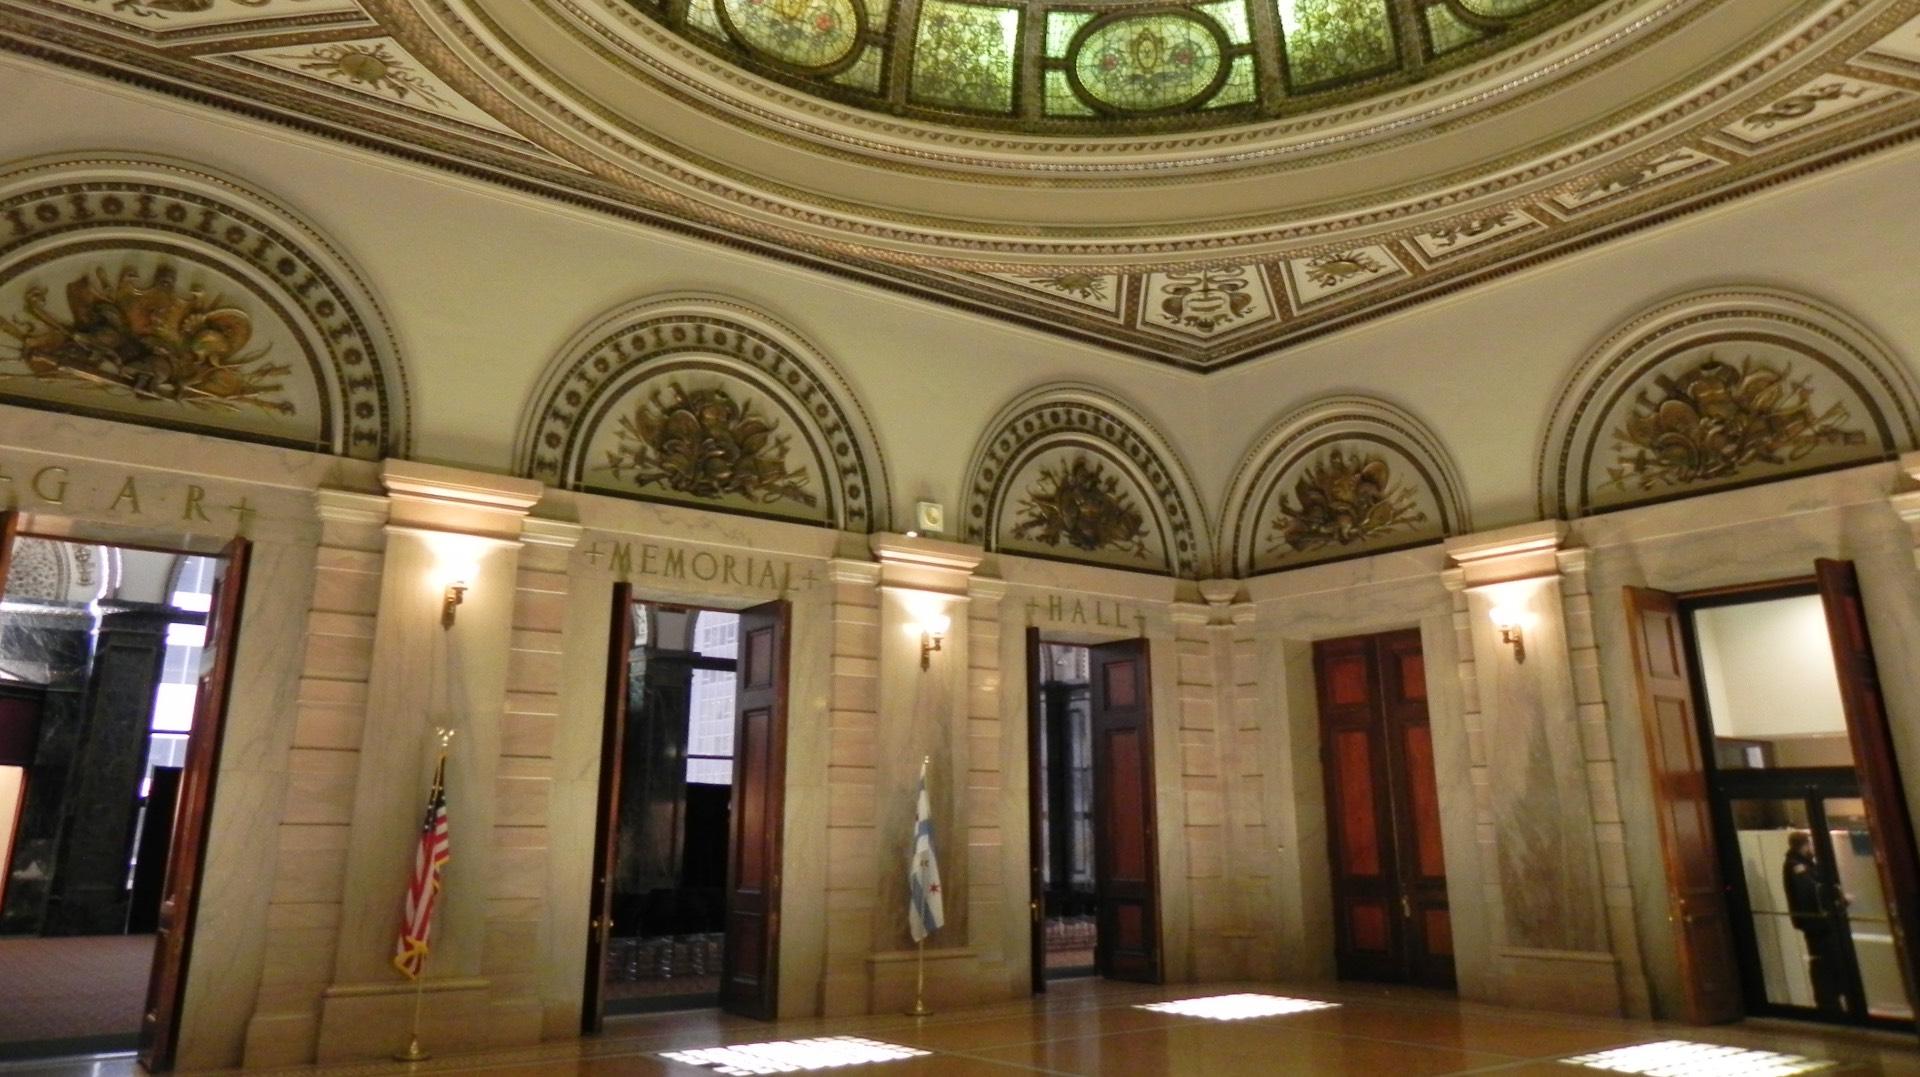 The Grand Army of the Republic Memorial Hall and Rotunda were created as a gathering place for Union Civil War veterans and to honor the war's dead. (Courtesy of Department of Cultural Affairs and Special Events)